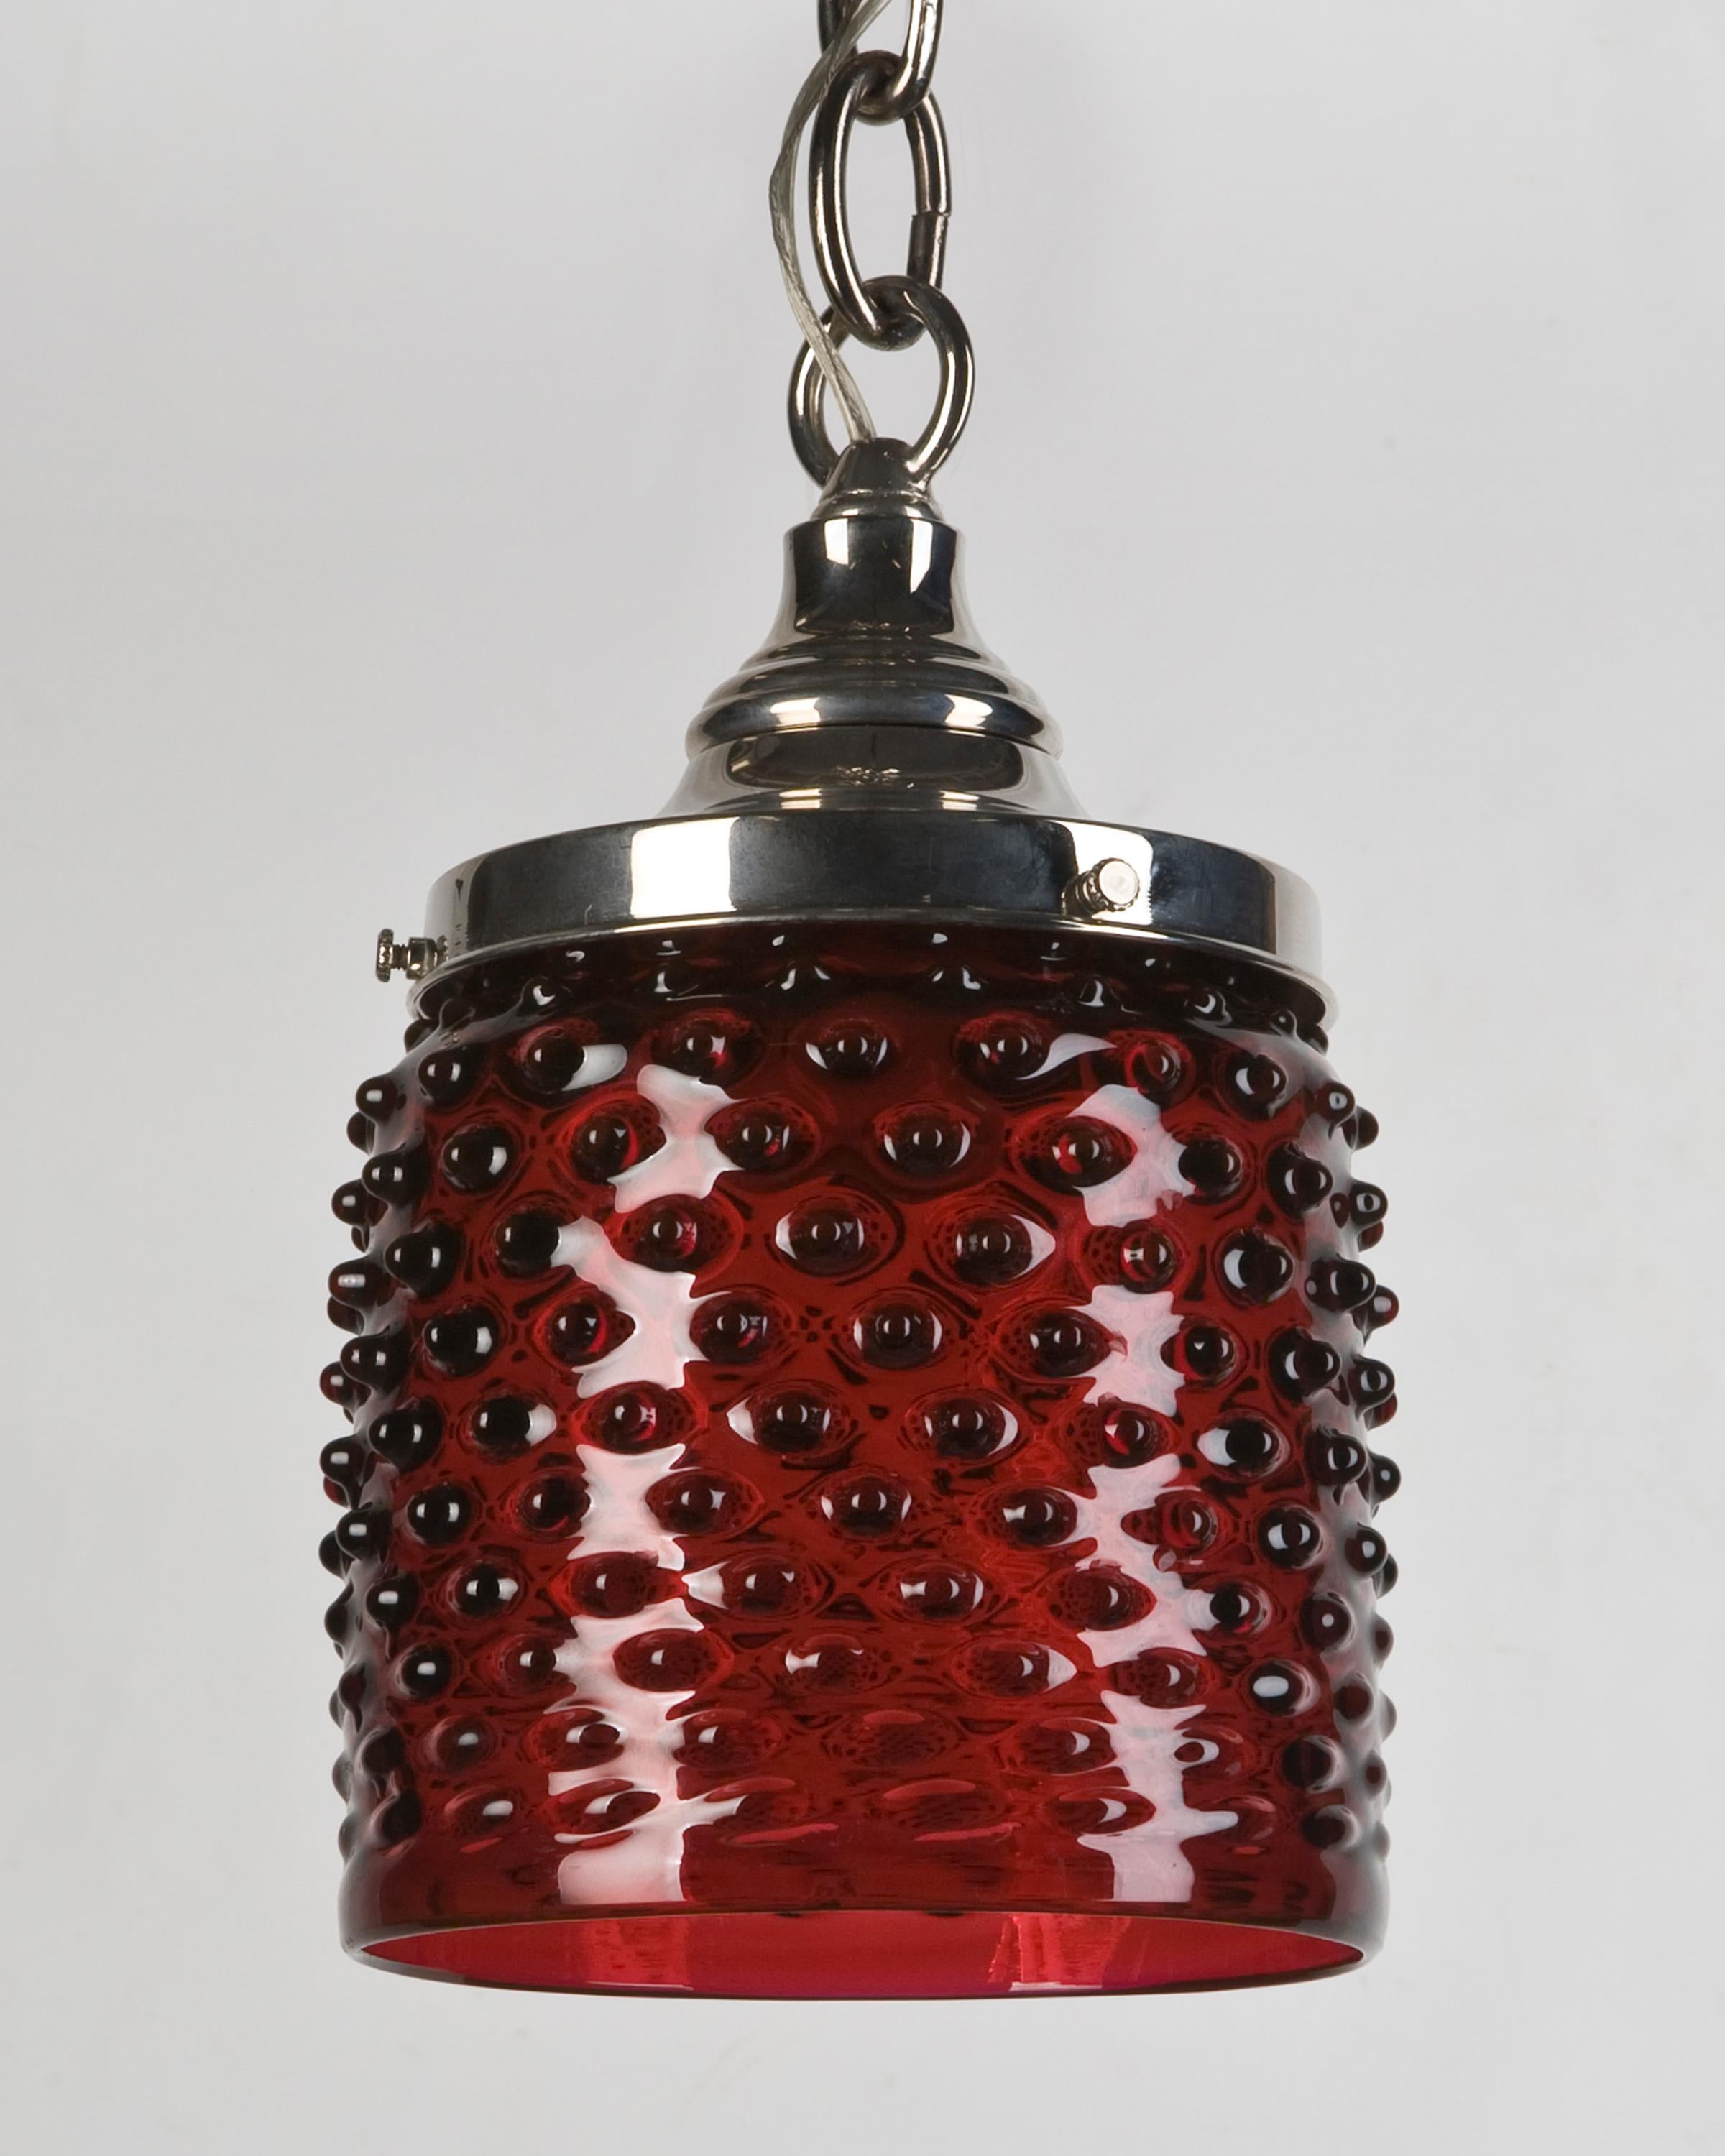 AHL3636
A red hand-blown hobnail-patterned glass cylinder pendant on polished nickel fittings. Due to the antique nature of this fixture, there may be some nicks or imperfections in the glass.

Dimensions:
Current height: 49